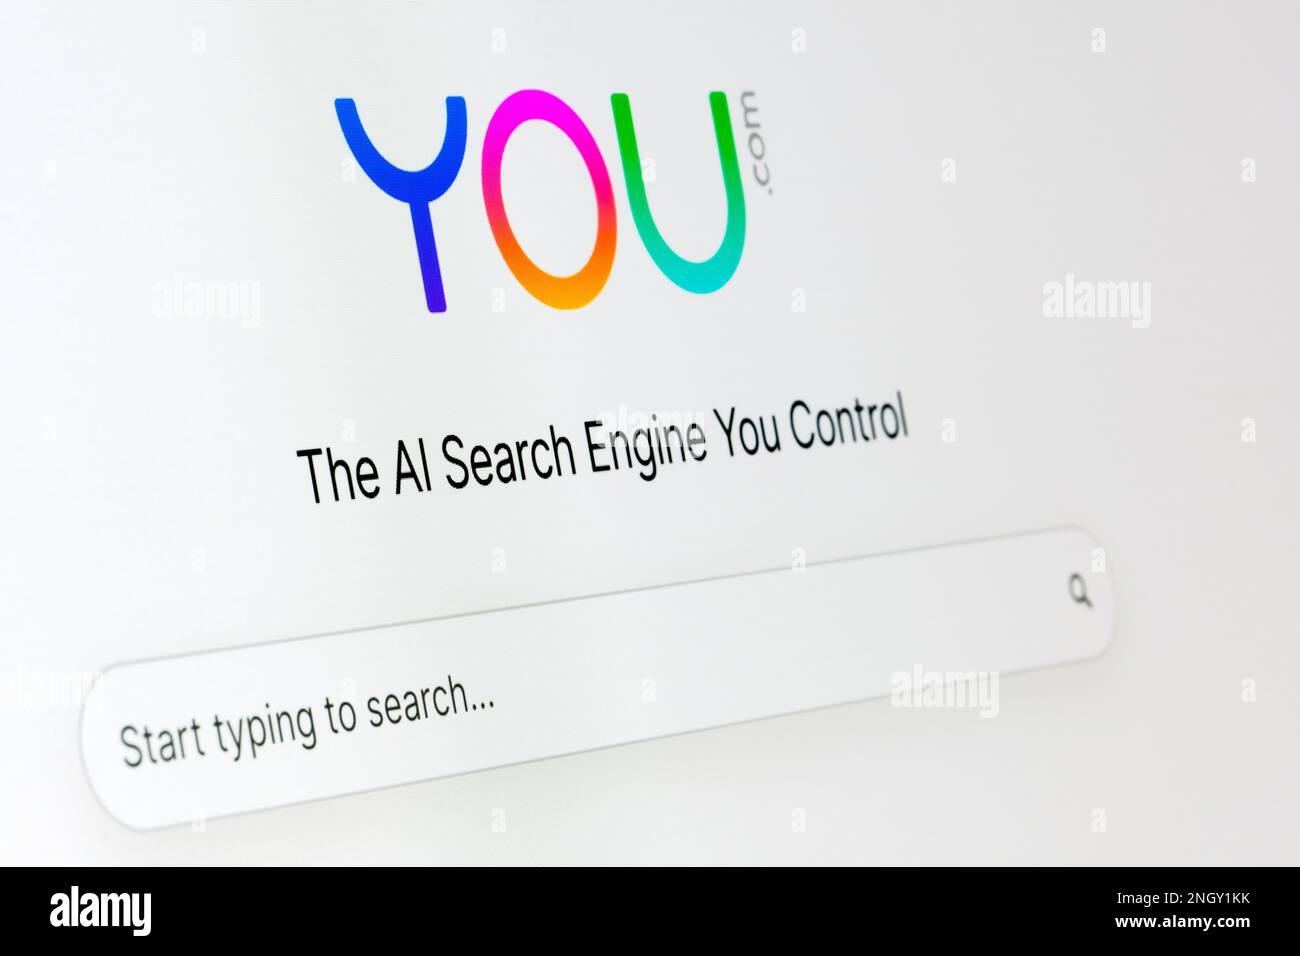 AI search engine YOU.COM seen on the screen. New artificial intelligence powered search engine. February 19, 2023 Stock Photo